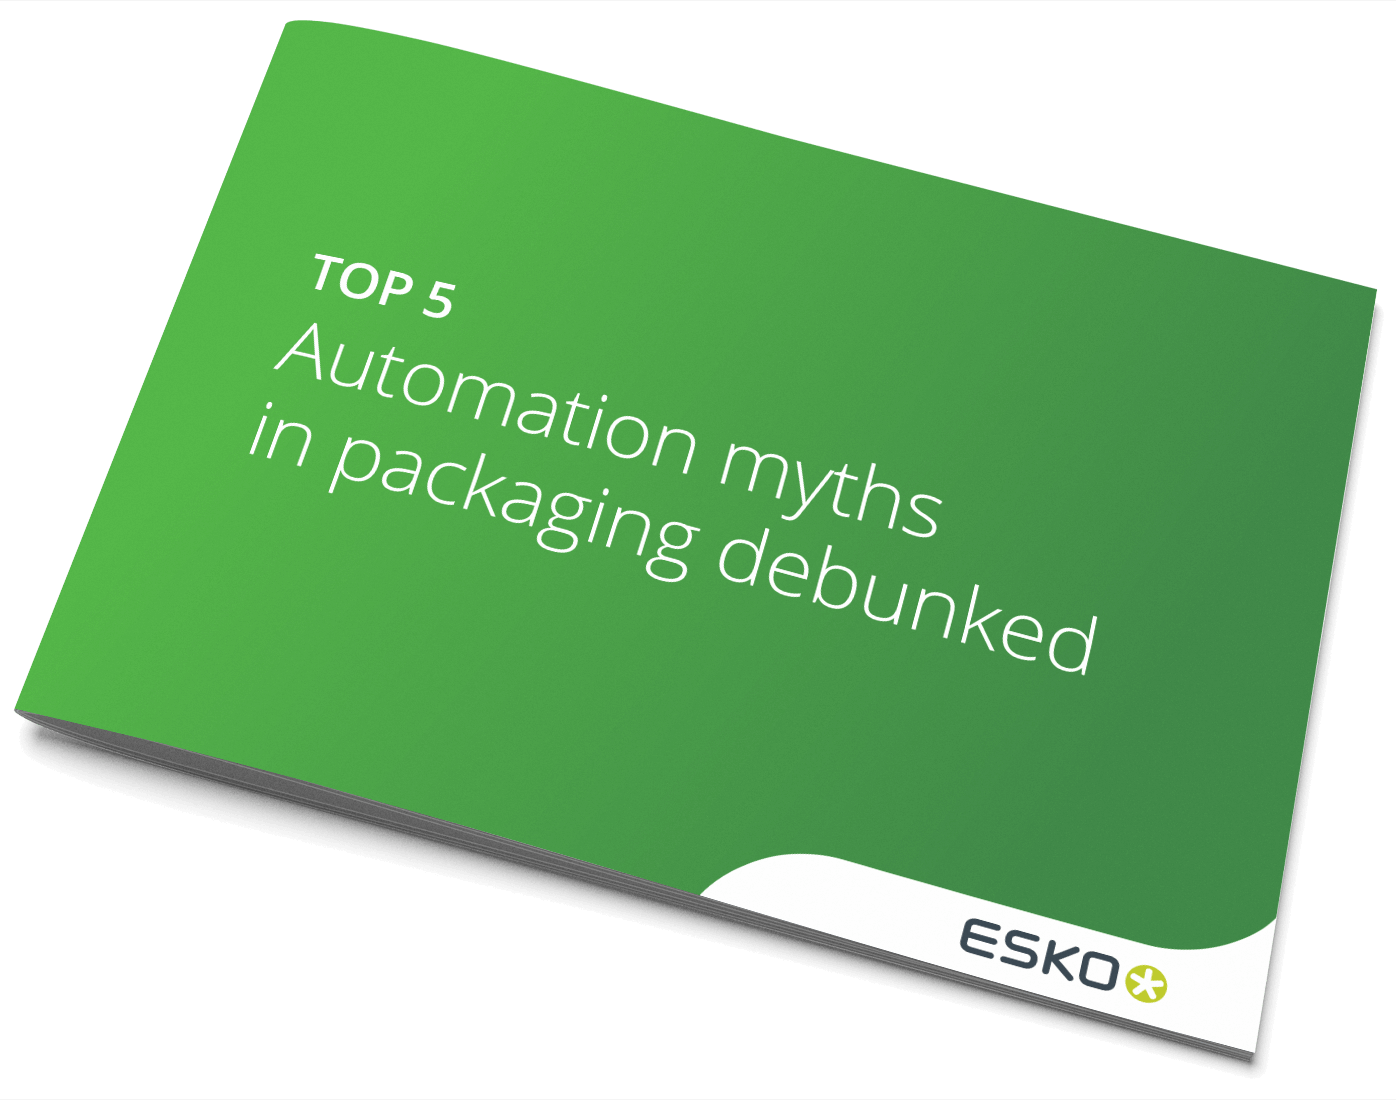 Top 5 automation myths in packaging debunked